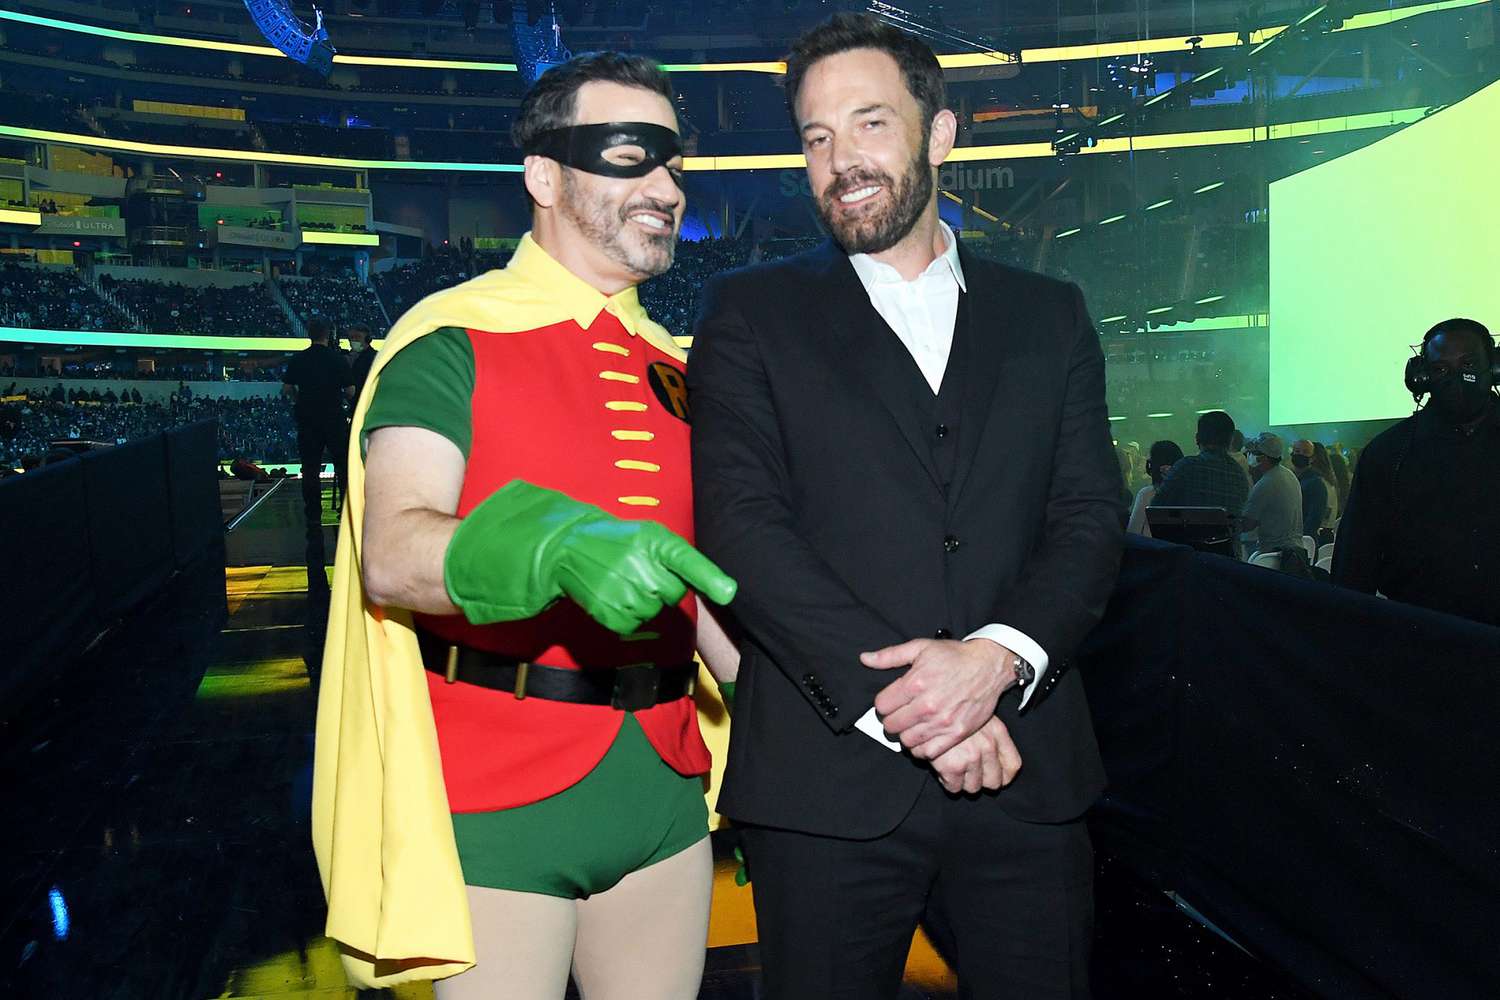 Jimmy Kimmel (in costume as Robin) and Ben Affleck backstage during Global Citizen VAX LIVE: The Concert To Reunite The World at SoFi Stadium in Inglewood, California. Global Citizen VAX LIVE: The Concert To Reunite The World will be broadcast on May 8, 2021